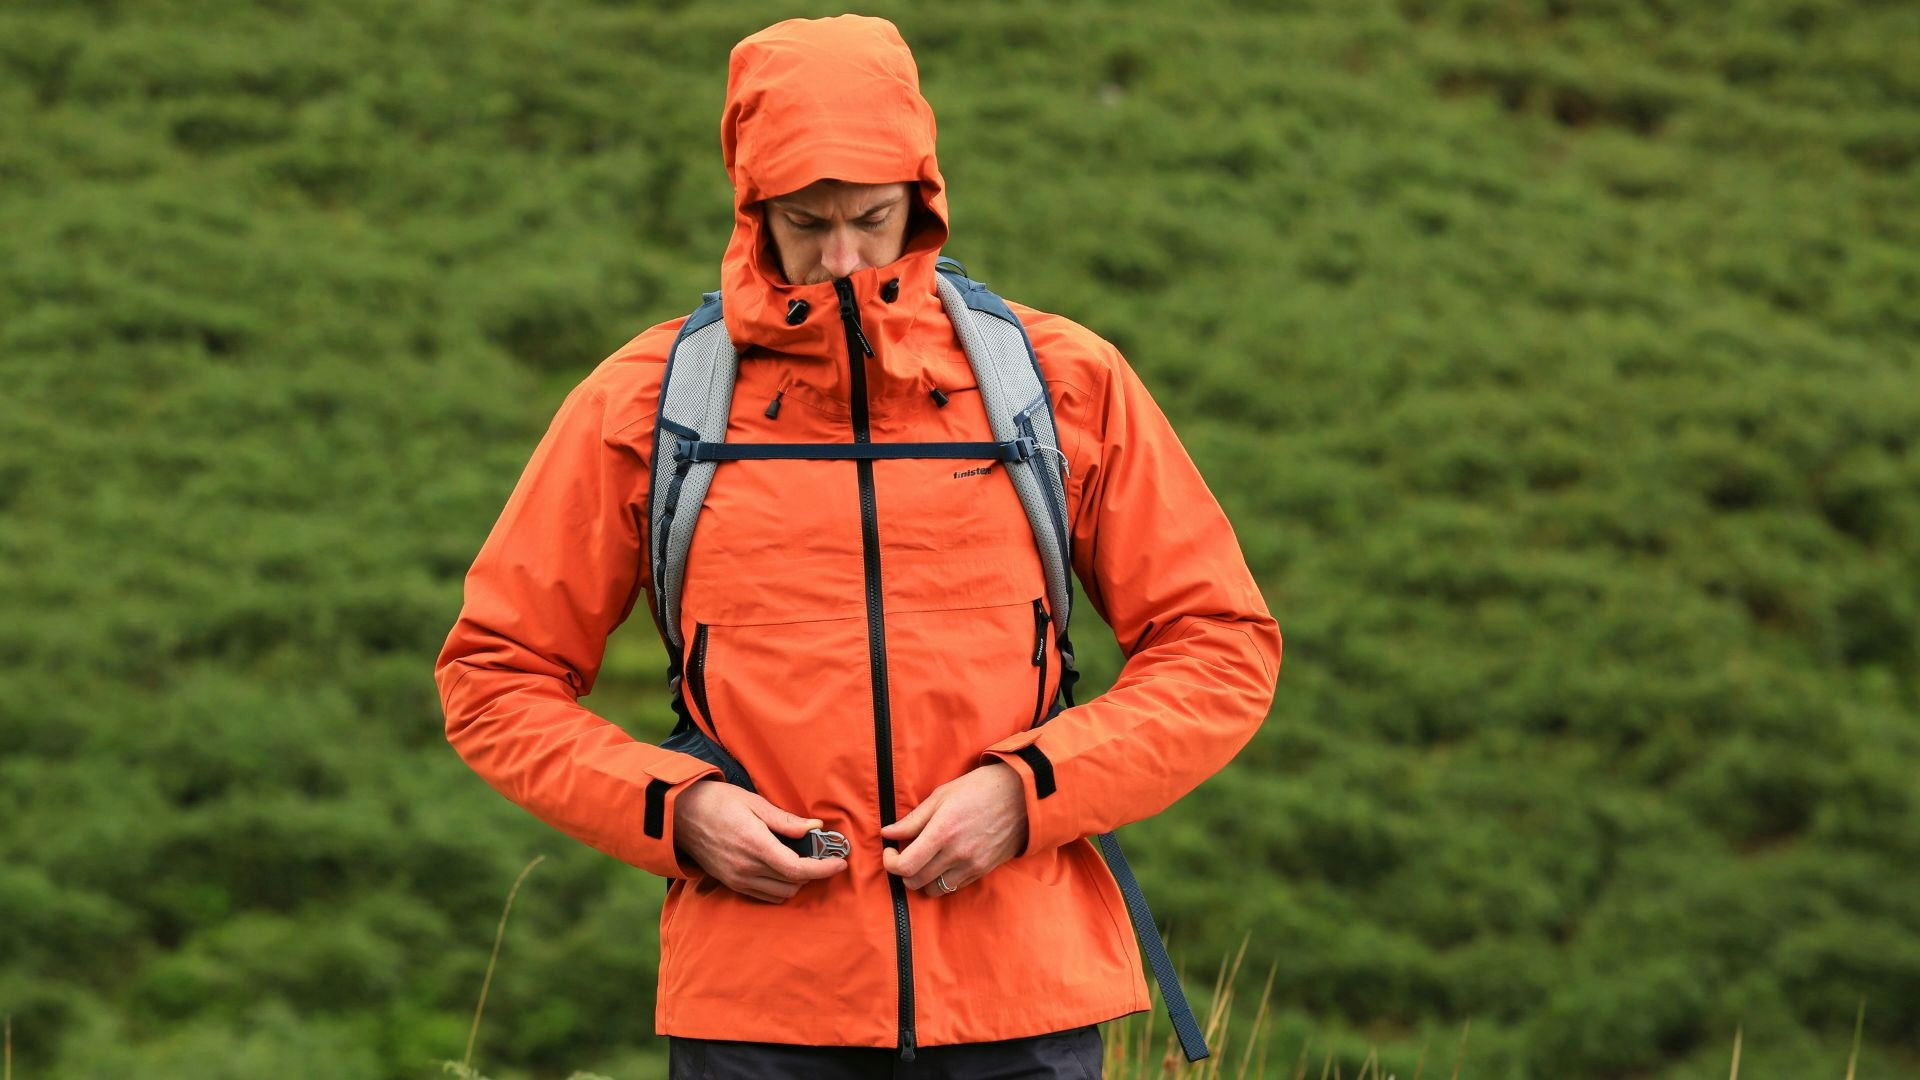 Finisterre Stormbird Waterproof Jacket tested and reviewed